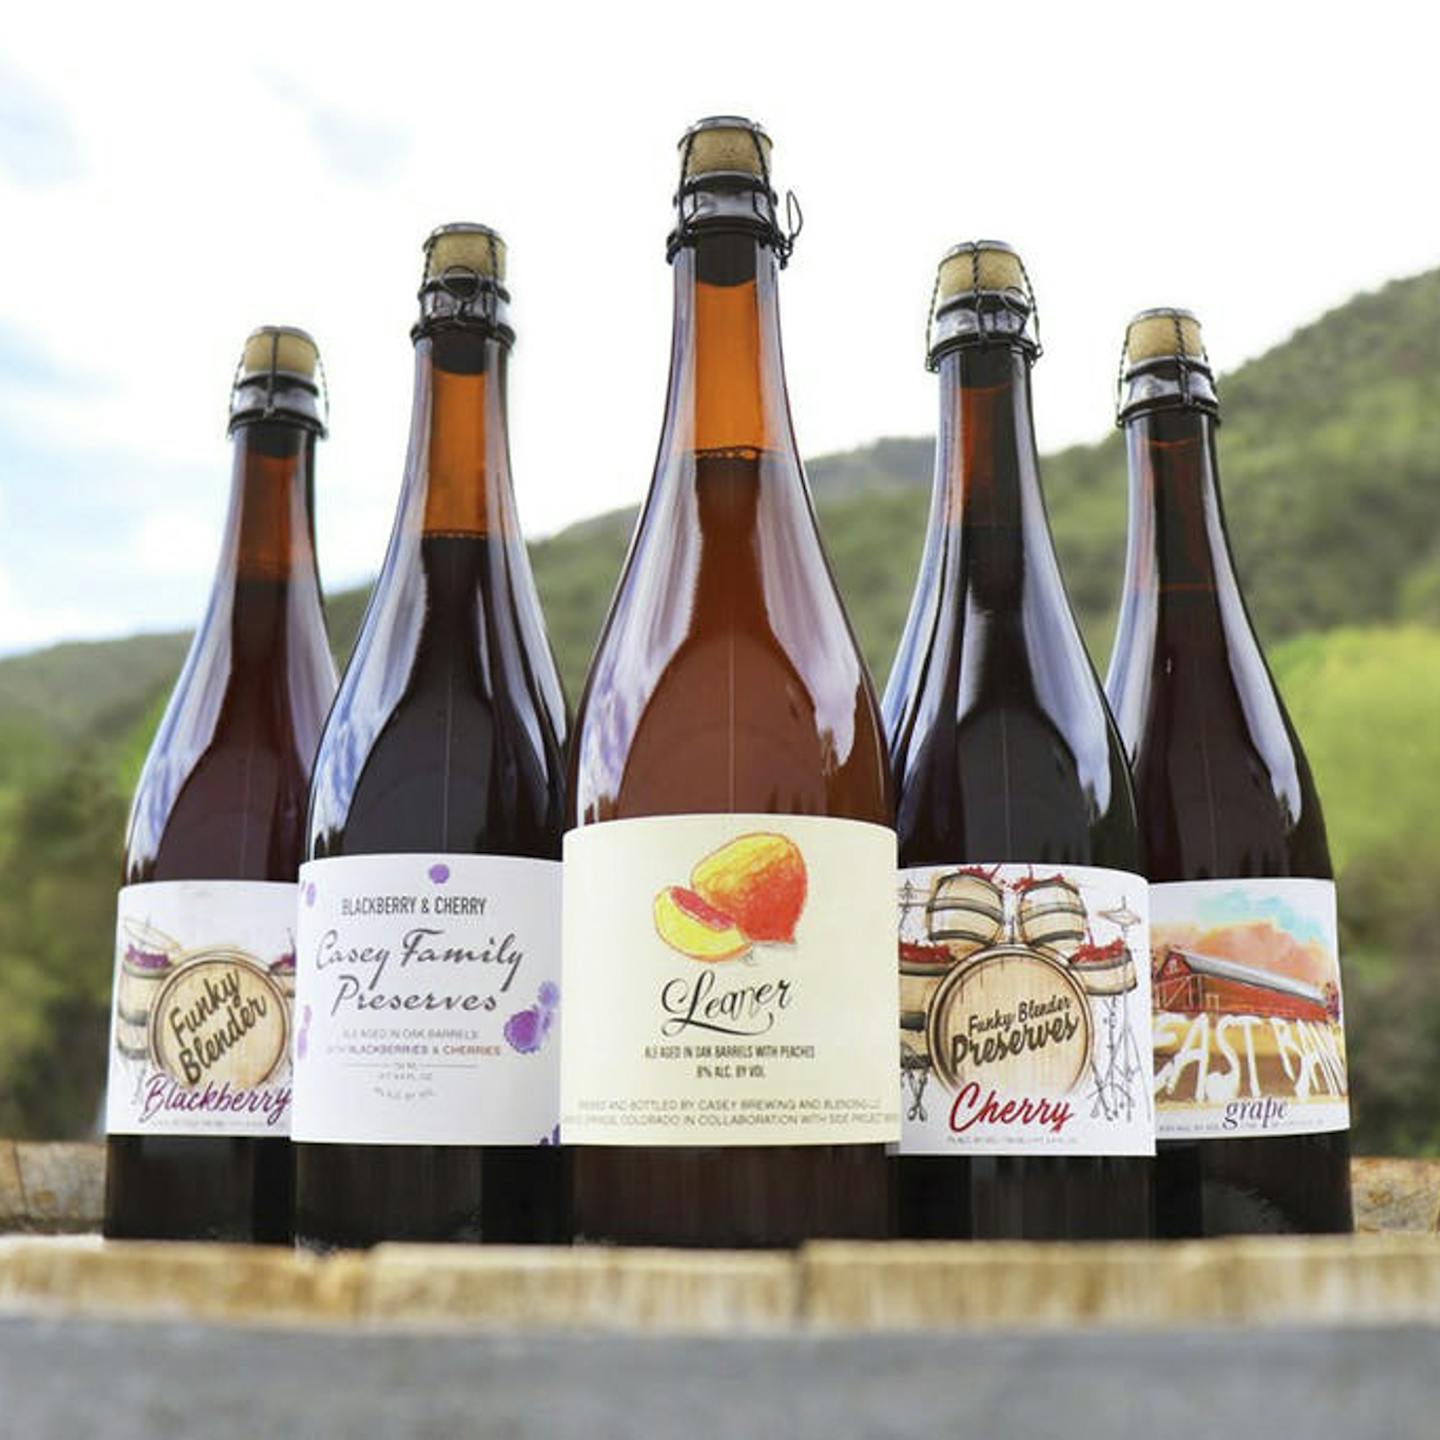 Fruited sour beers by Casey Brewing in Bottles